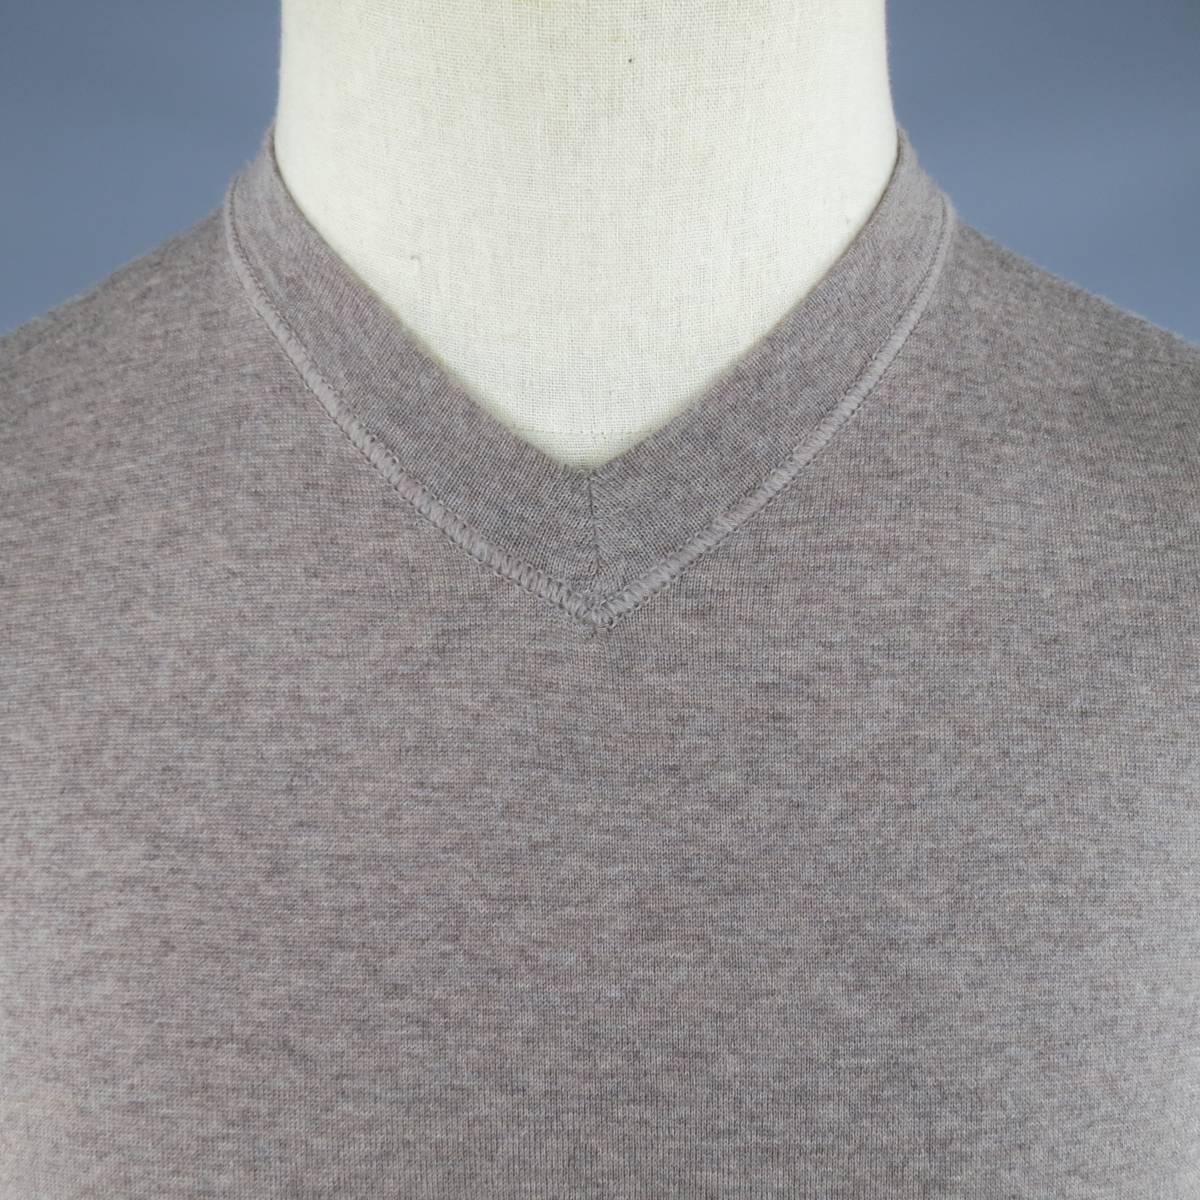 BRAND NEW JIL SANDER Pullover consists of wool material in a oatmeal color tone. Designed in a v-neck collar, heather pattern and tone-on-tone stitching. Comes with original tags. Made in Italy.
 
New Pre-Owned Condition 
Marked Size: 48
